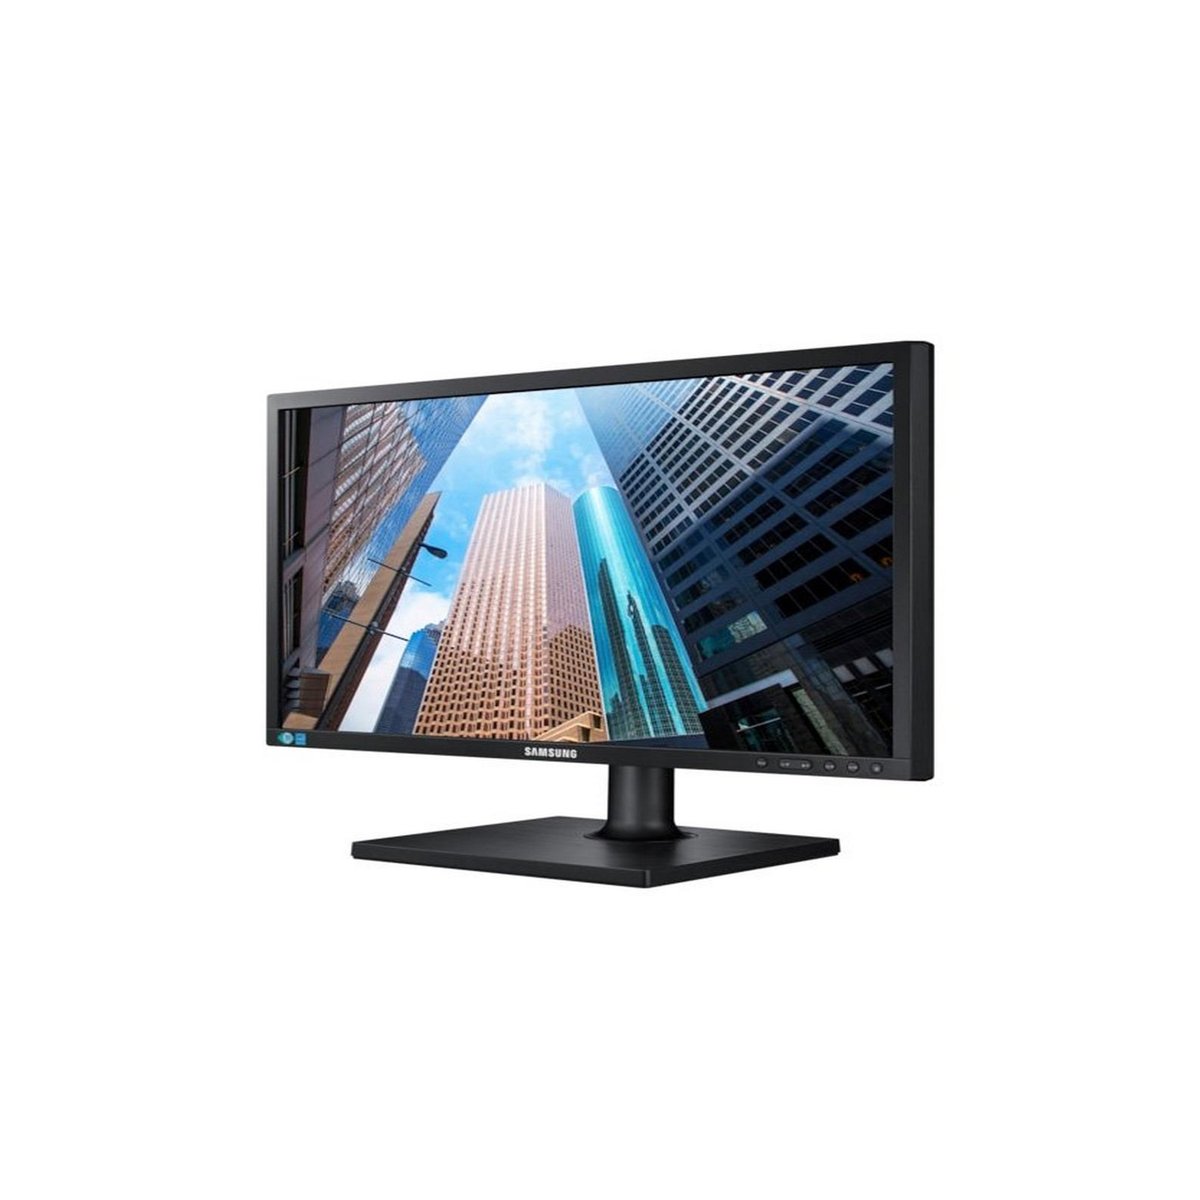 Samsung LED Monitor LS24E65UPLC 24 inches